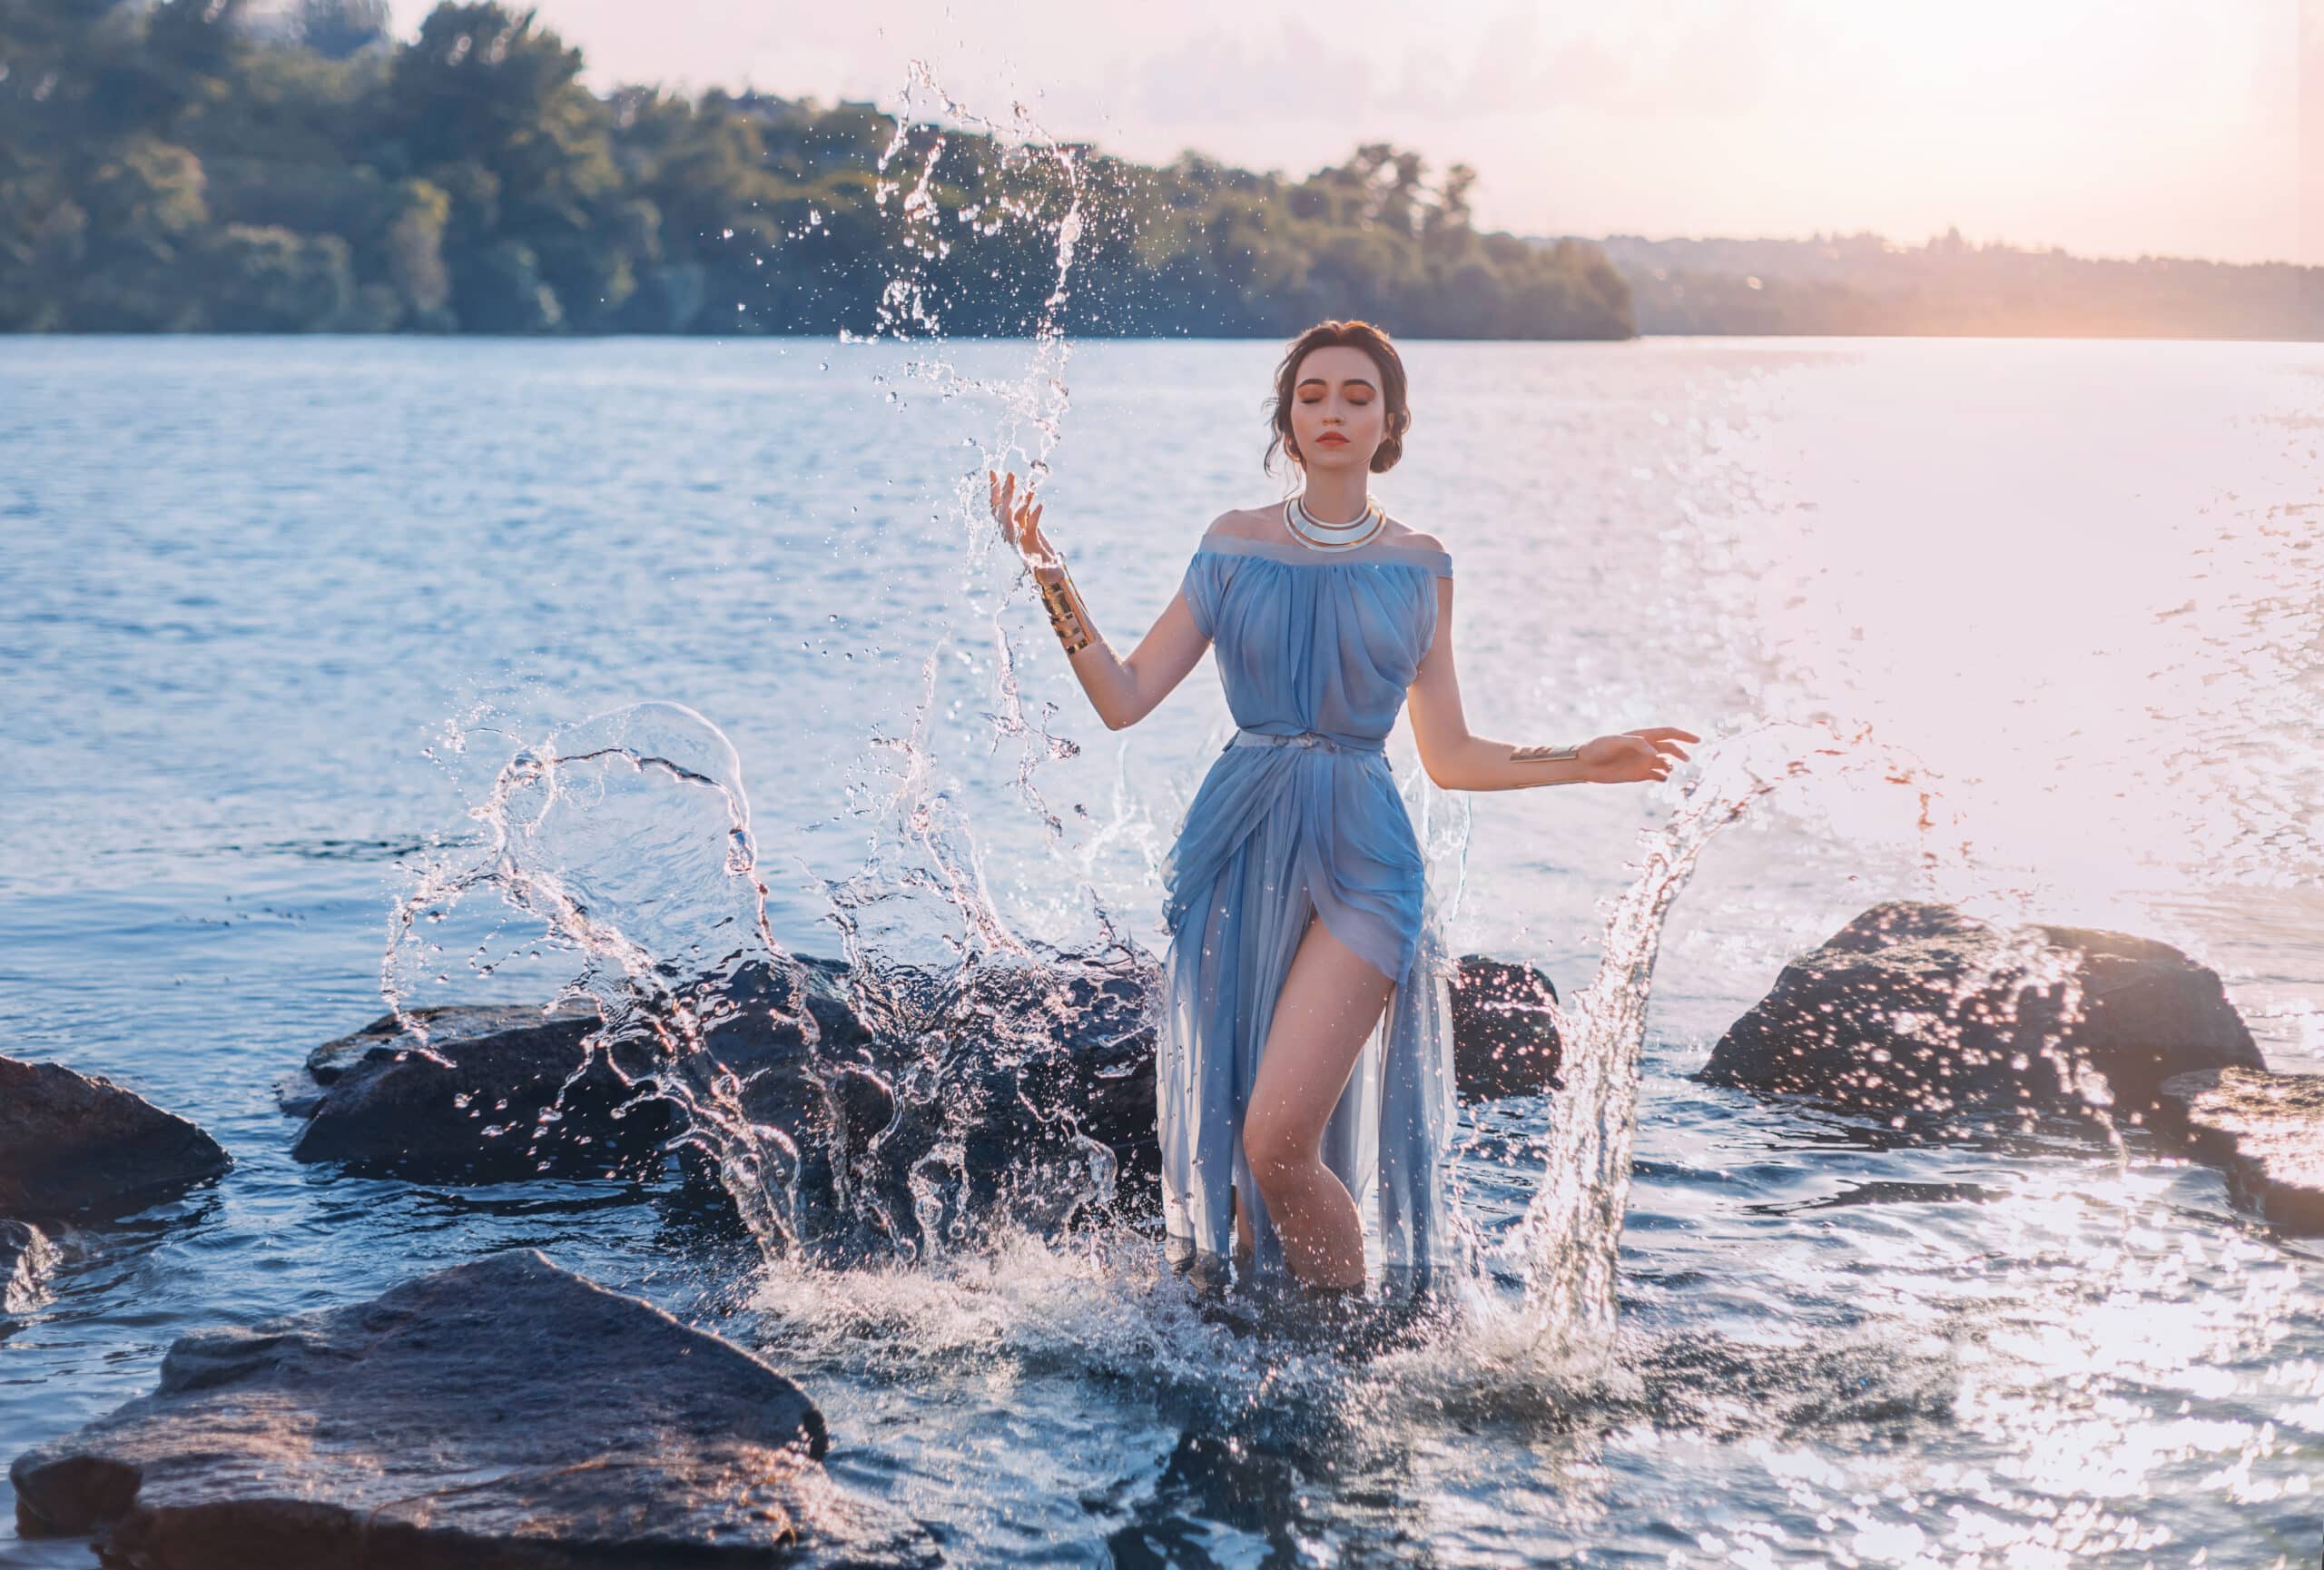 Greek mythical woman in blue gown emerges from the lake